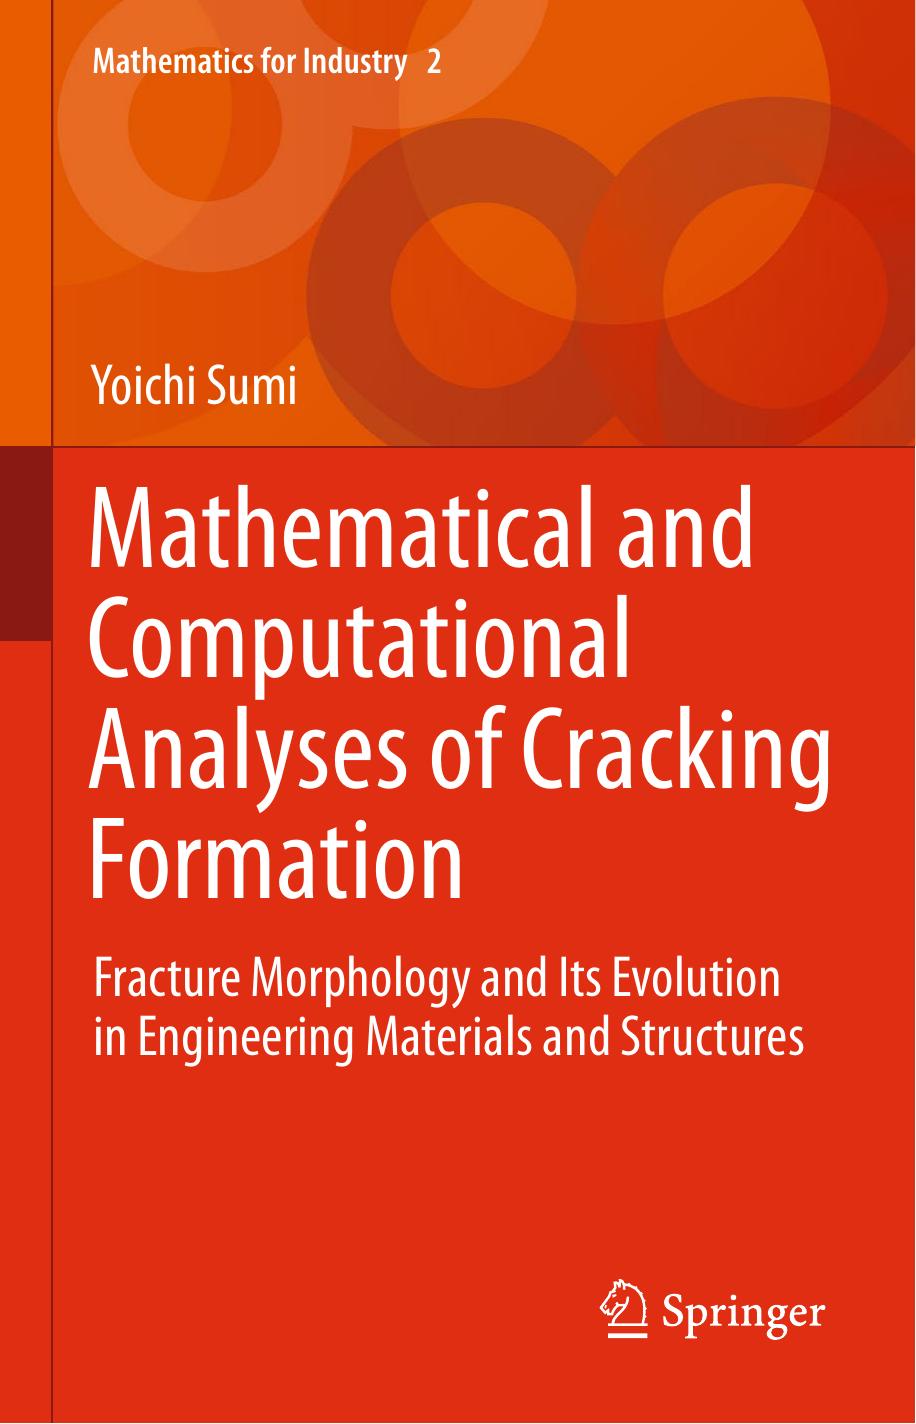 Mathematical and Computational Analyses of Cracking Formation: Fracture Morphology and Its Evolution in Engineering Materials and Structures